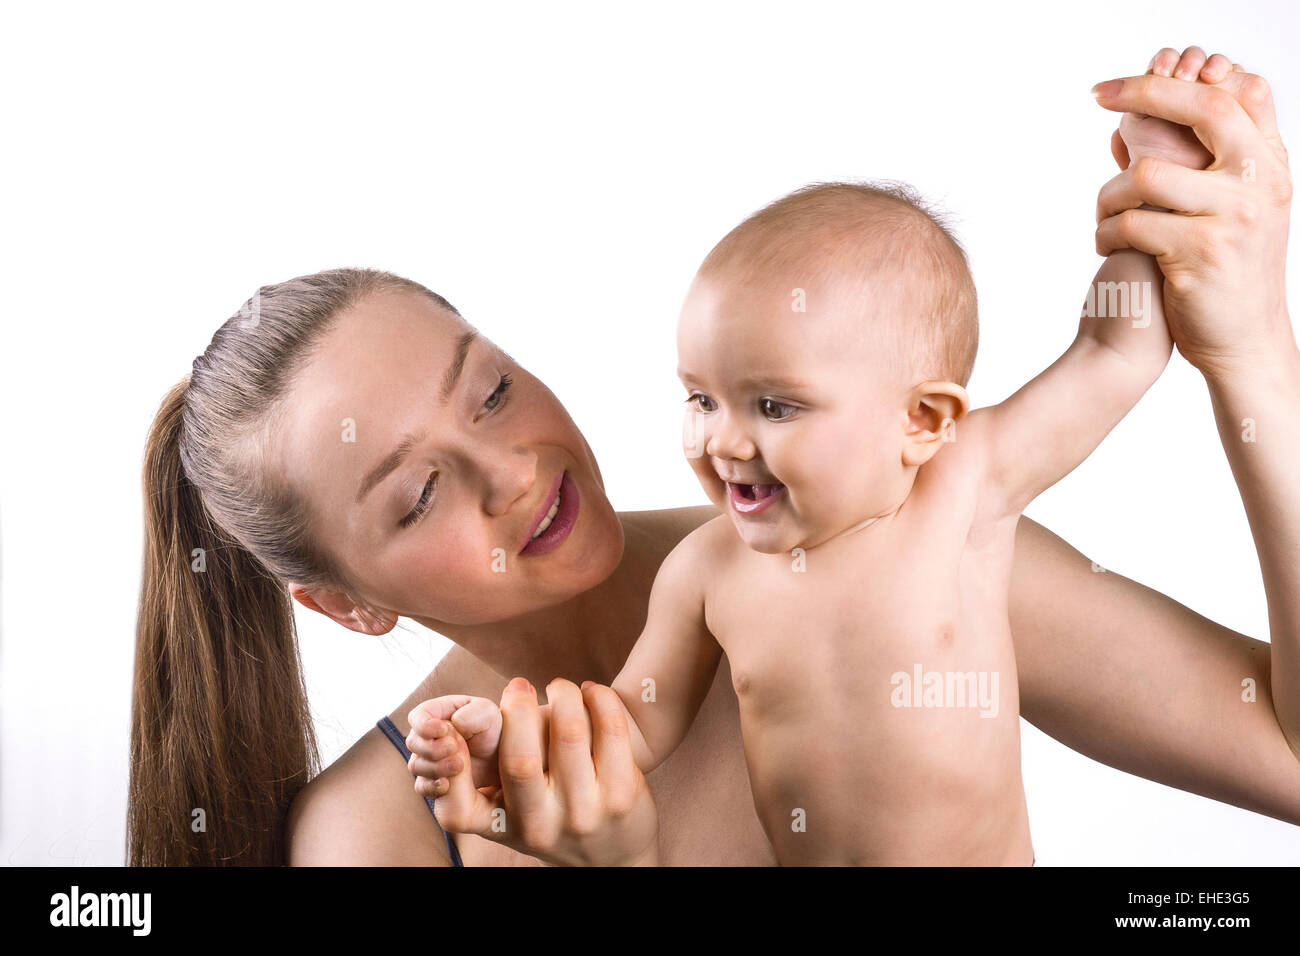 Young mother holding her baby and smiling together on white background. Stock Photo